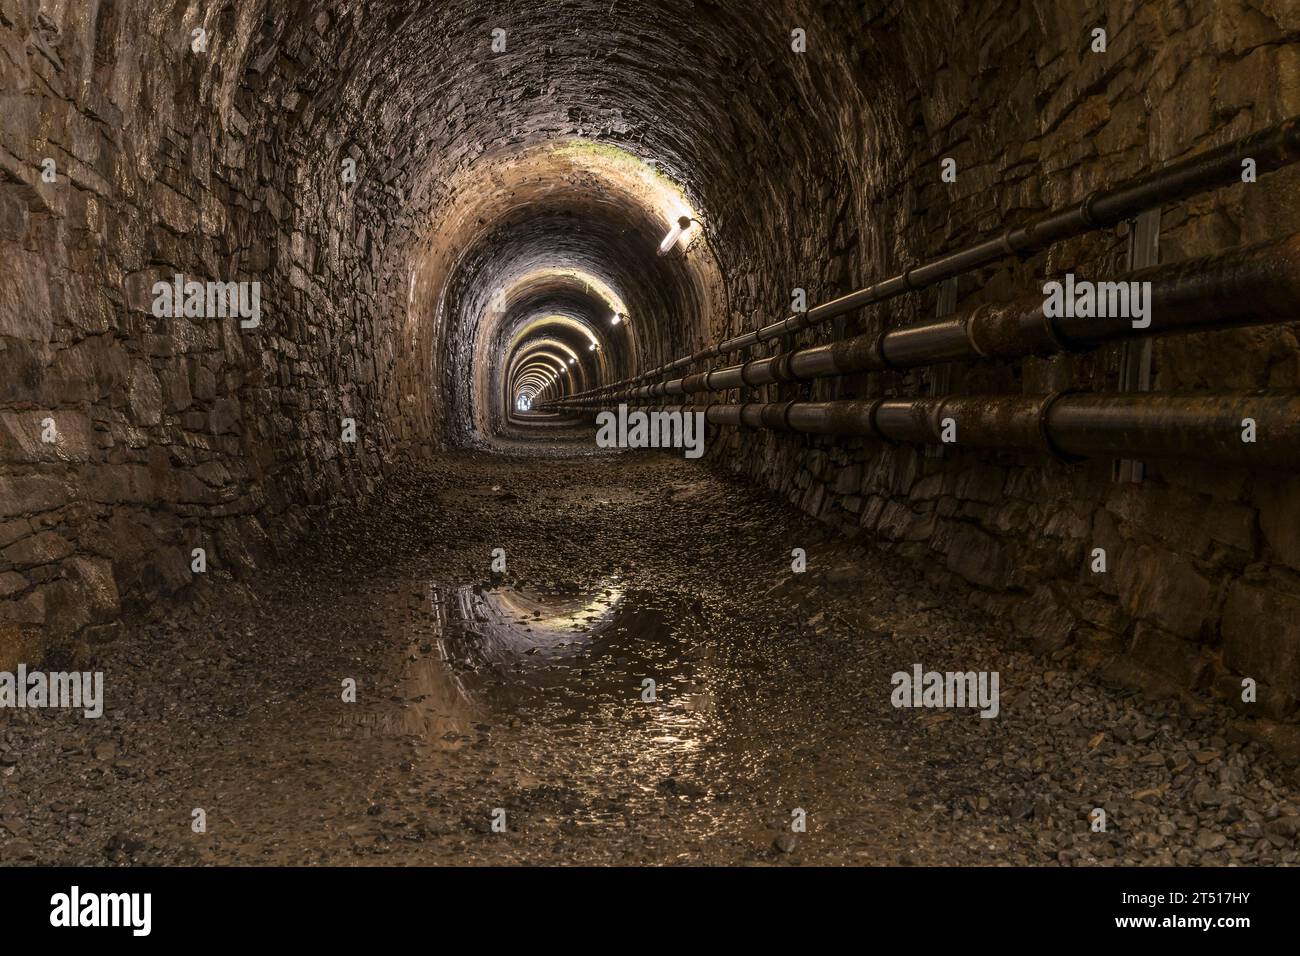 tunnel of a historic mining site Stock Photo